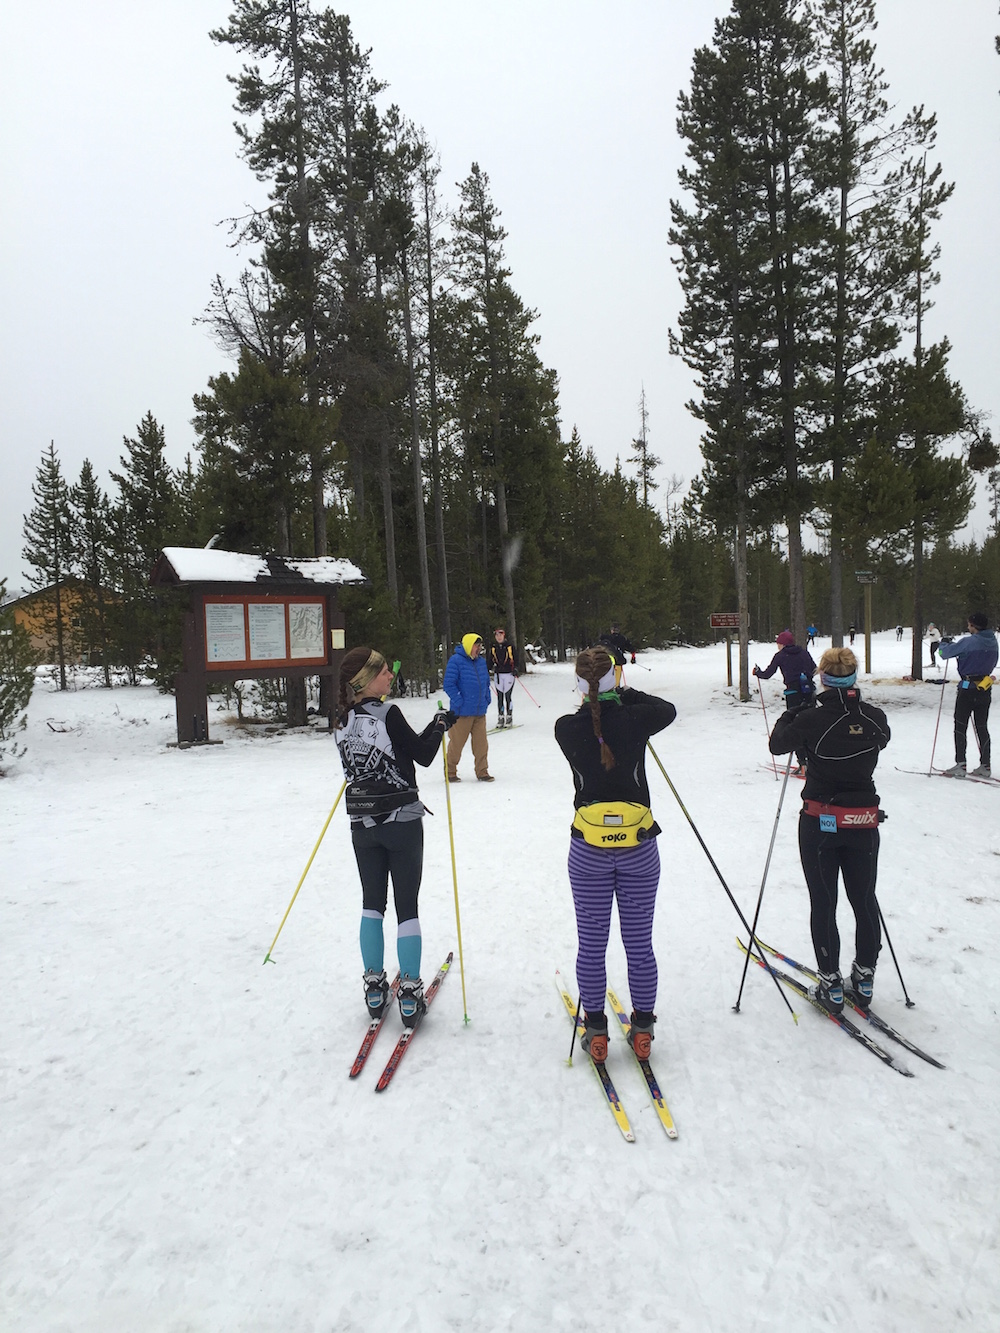 Skiers at the trailhead of the Rendezvous Ski Trails in West Yellowstone, Mont., on Monday, Nov. 21. (Photo: FBD) 